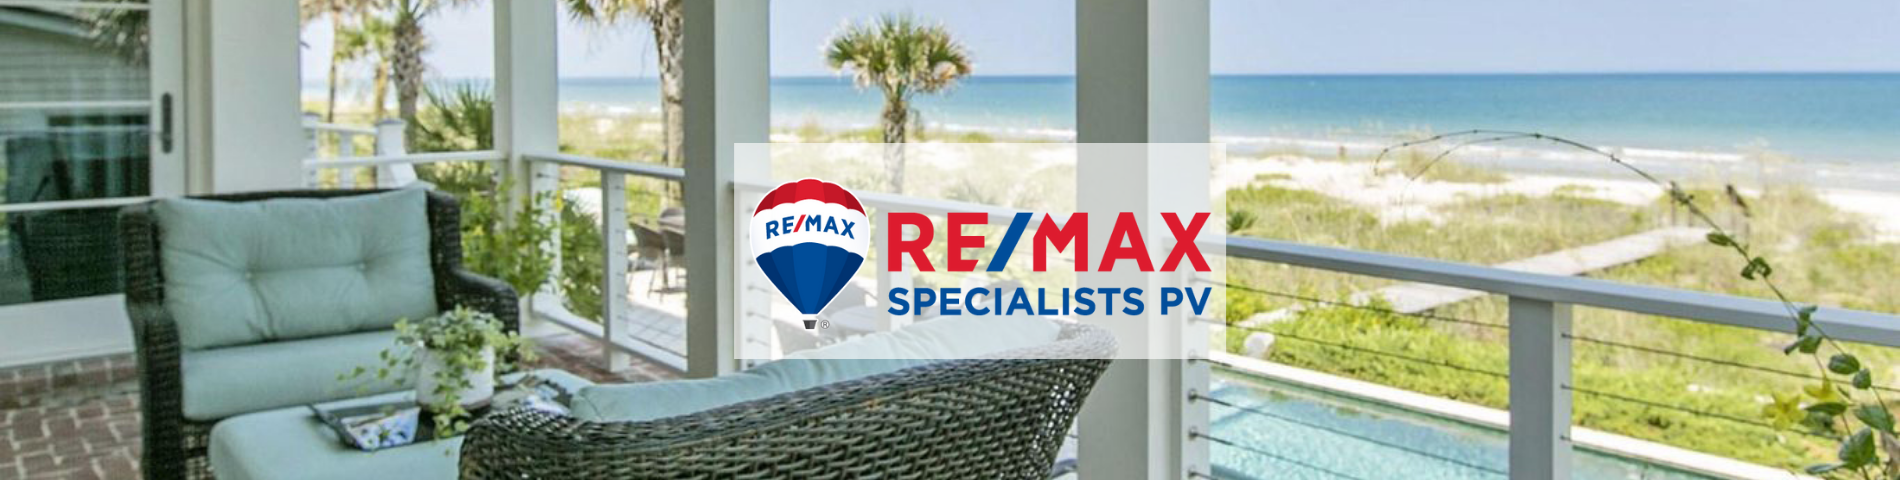 RE/MAX Specialists PV